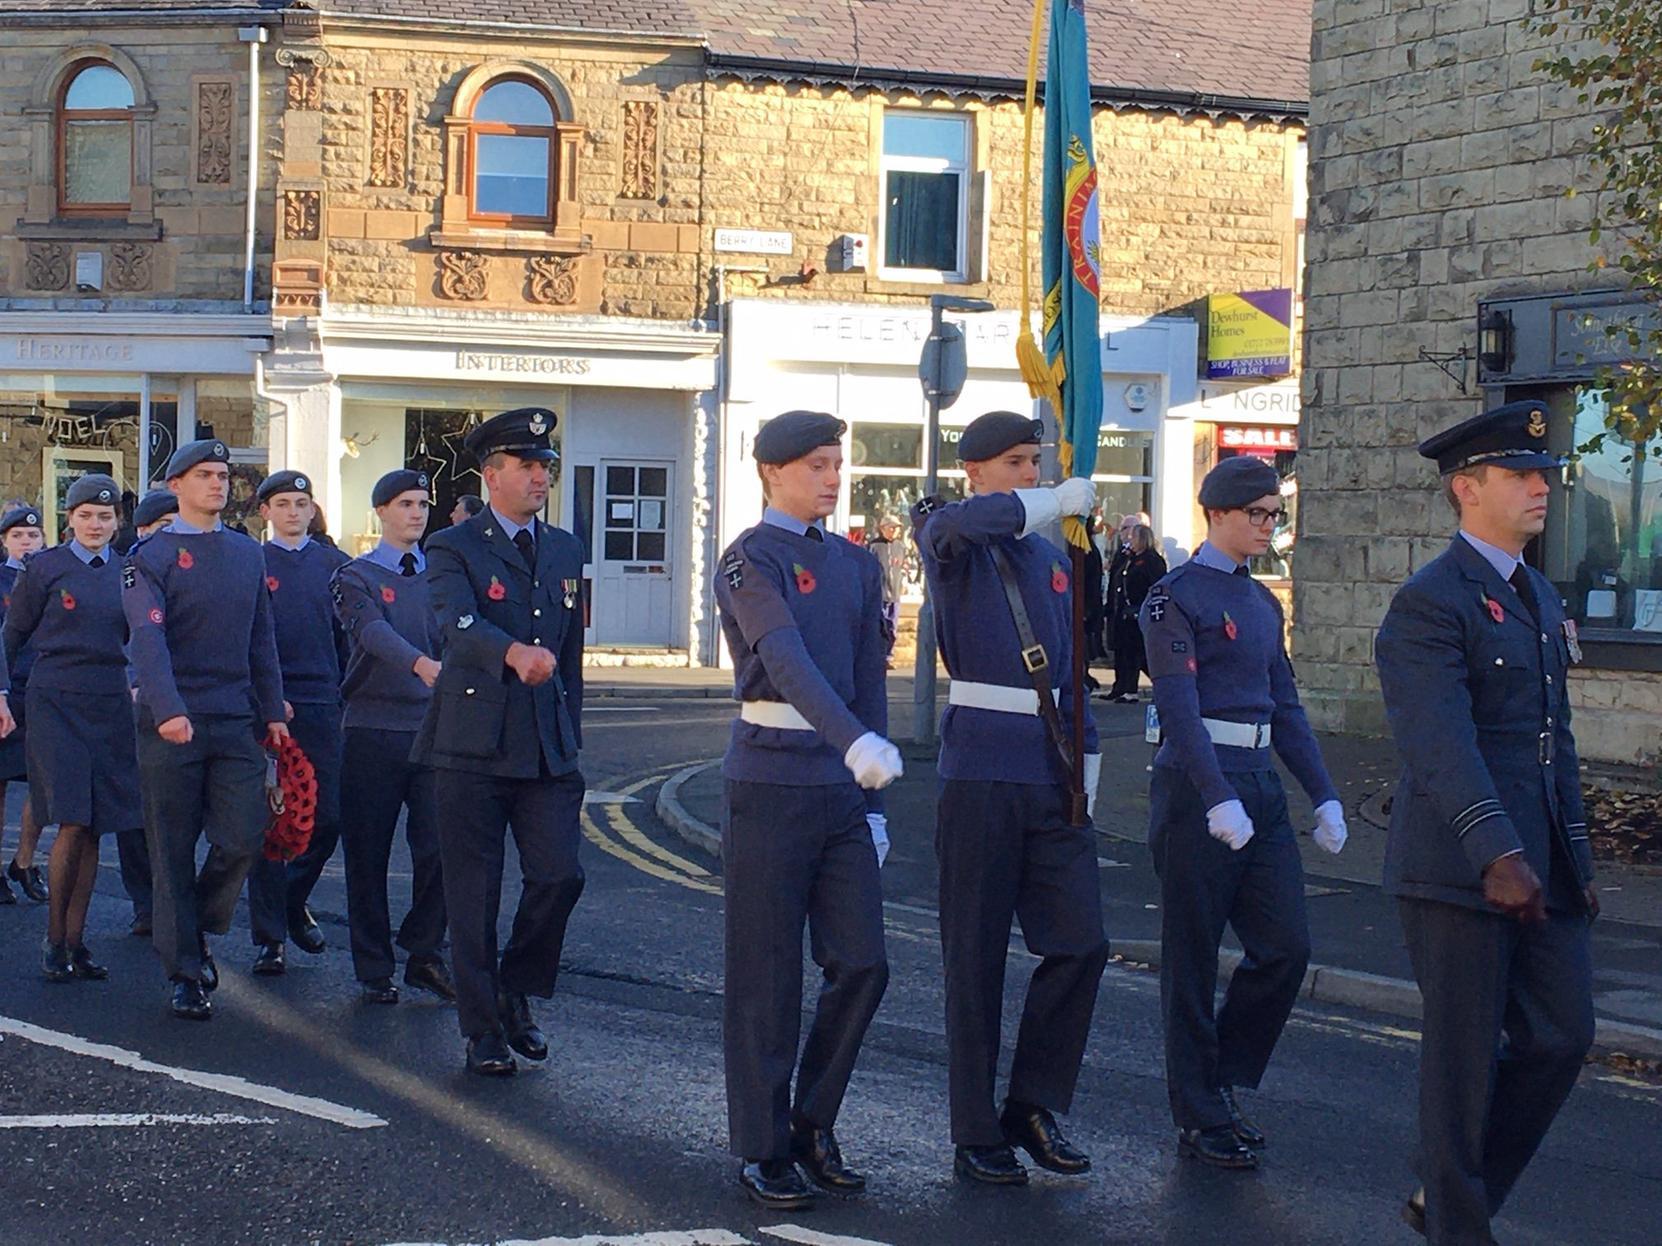 The air cadets marching in the town procession